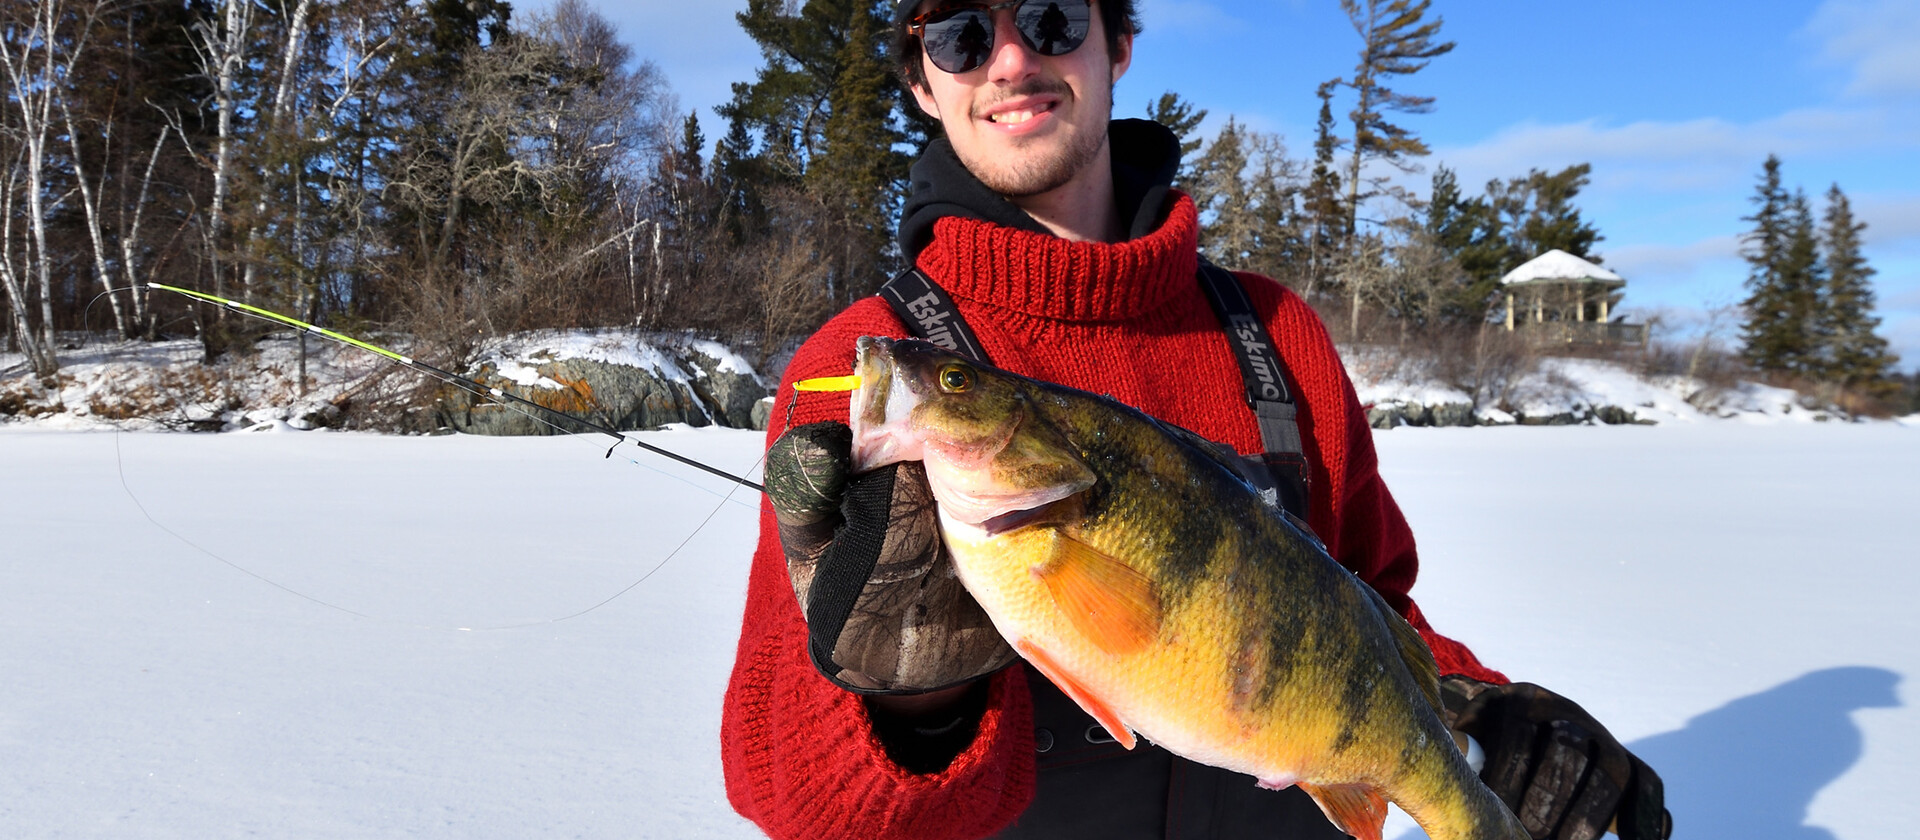 A Spoon-First Strategy for Ice Fishing Panfish 